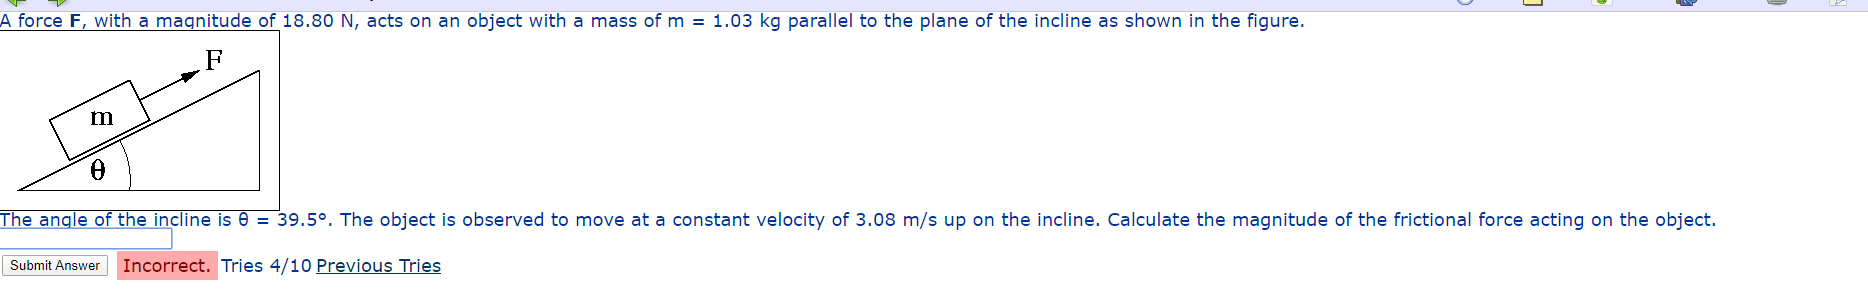 A force F, with a magnitude of 18.80 N, acts on an object with a mass of m = 1.03 kg parallel to the plane of the incline as shown in the figure.
The angle of the incline is 0 = 39.5°. The object is observed to move at a constant velocity of 3.08 m/s up on the incline. Calculate the magnitude of the frictional force acting on the object.
Submit Answer
Incorrect. Tries 4/10 Previous Tries
